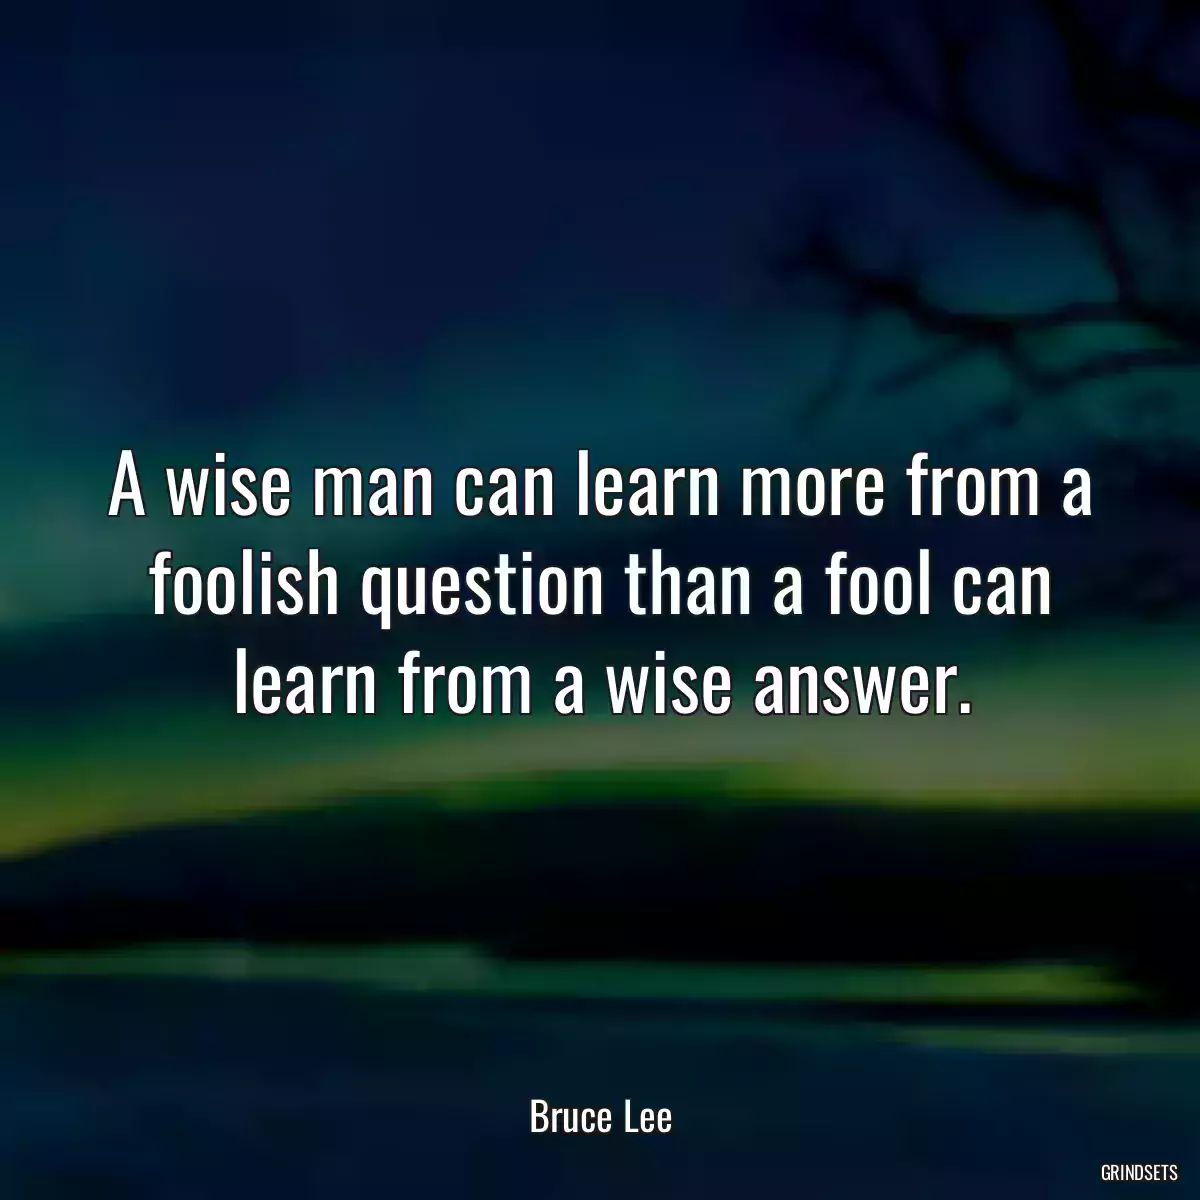 A wise man can learn more from a foolish question than a fool can learn from a wise answer.